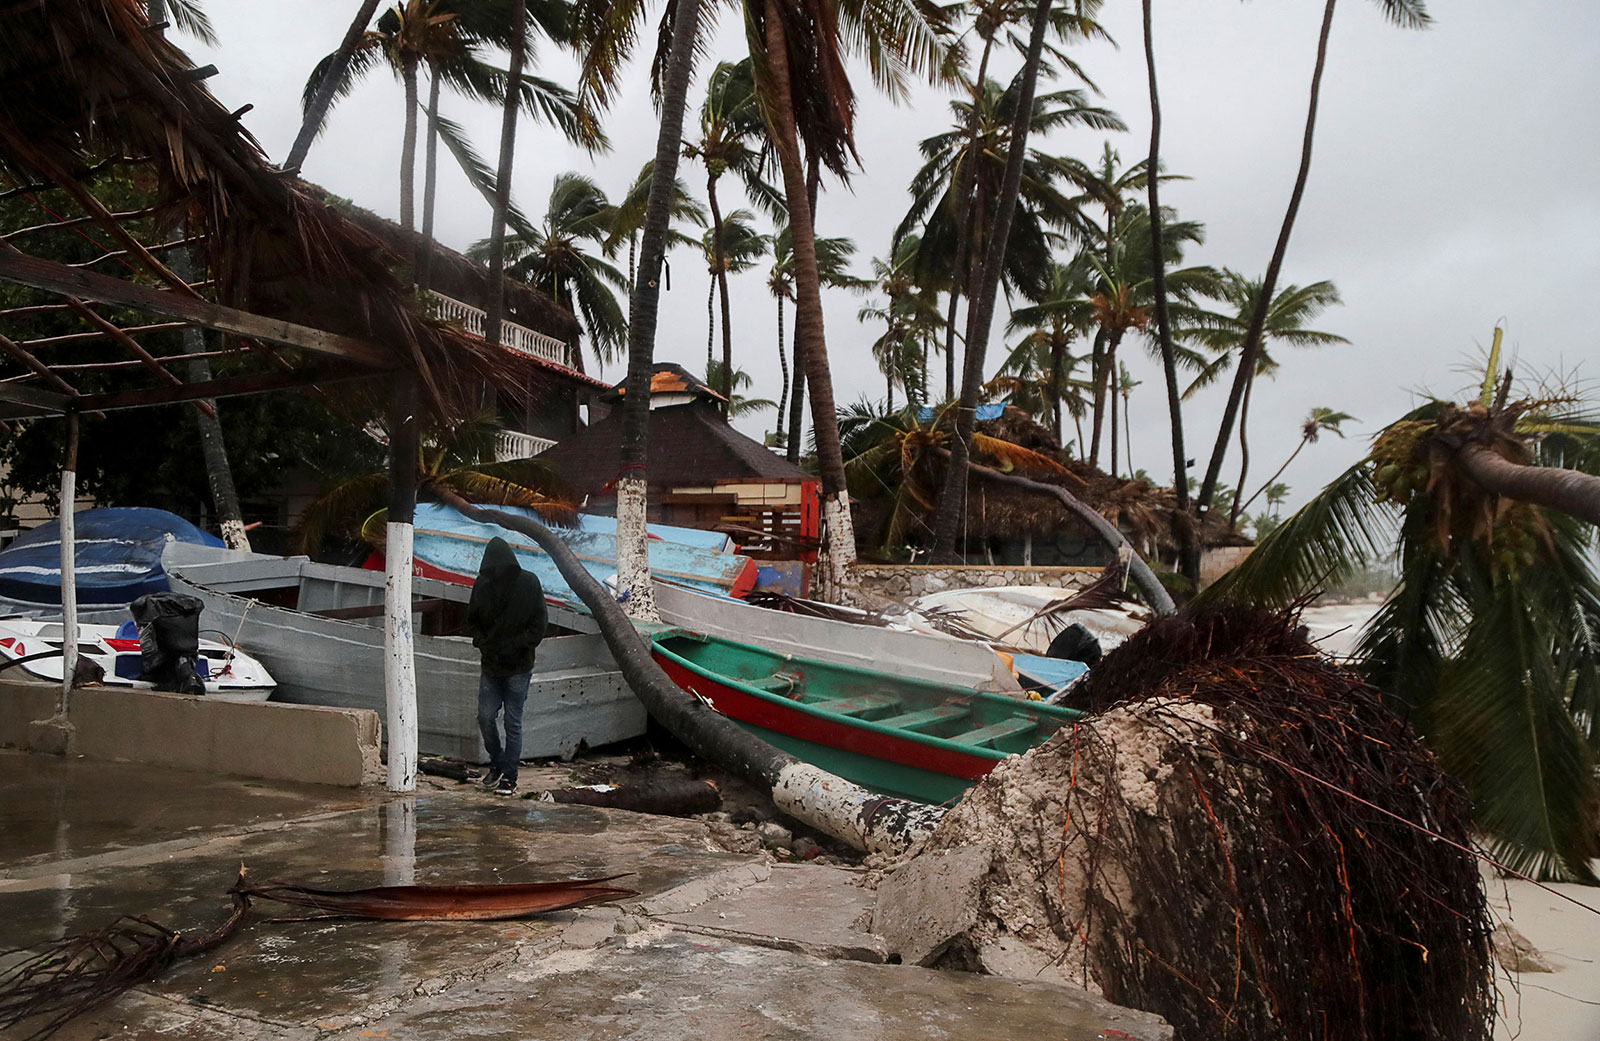 A person walks amidst debris on the seashore in the aftermath of Hurricane Fiona in Punta Cana, Dominican Republic on September 19. 